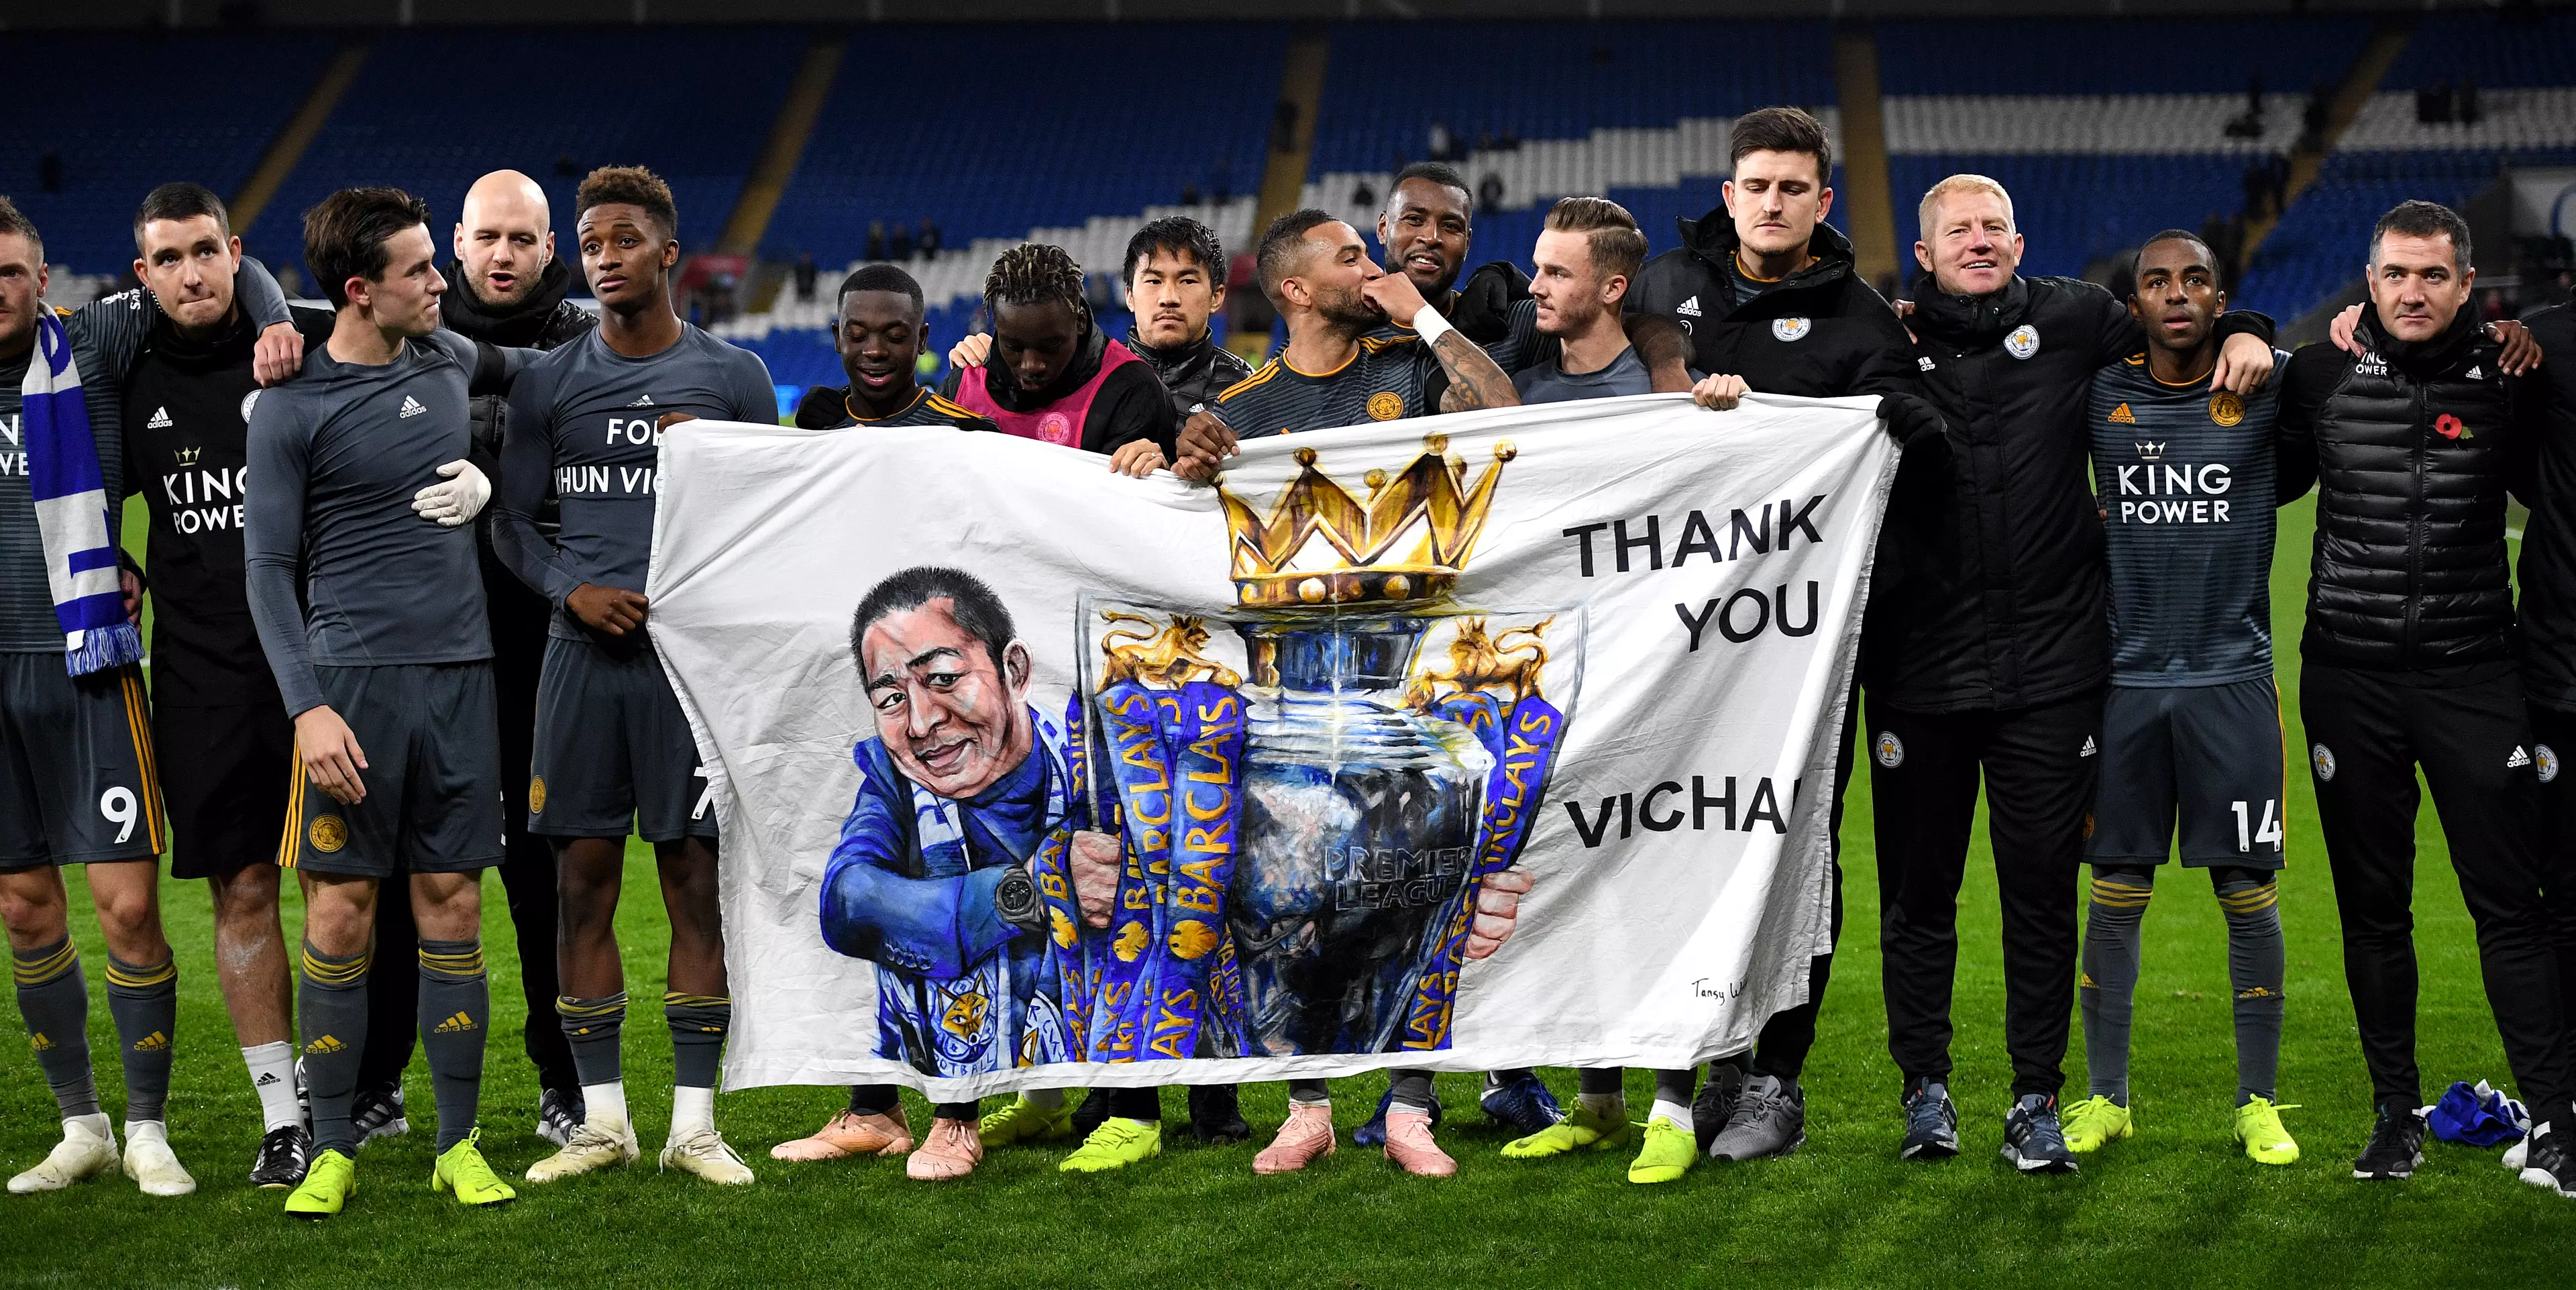 Leicester players and staff pay tribute to Vichai Srivaddhanaprabha. Image: PA Images